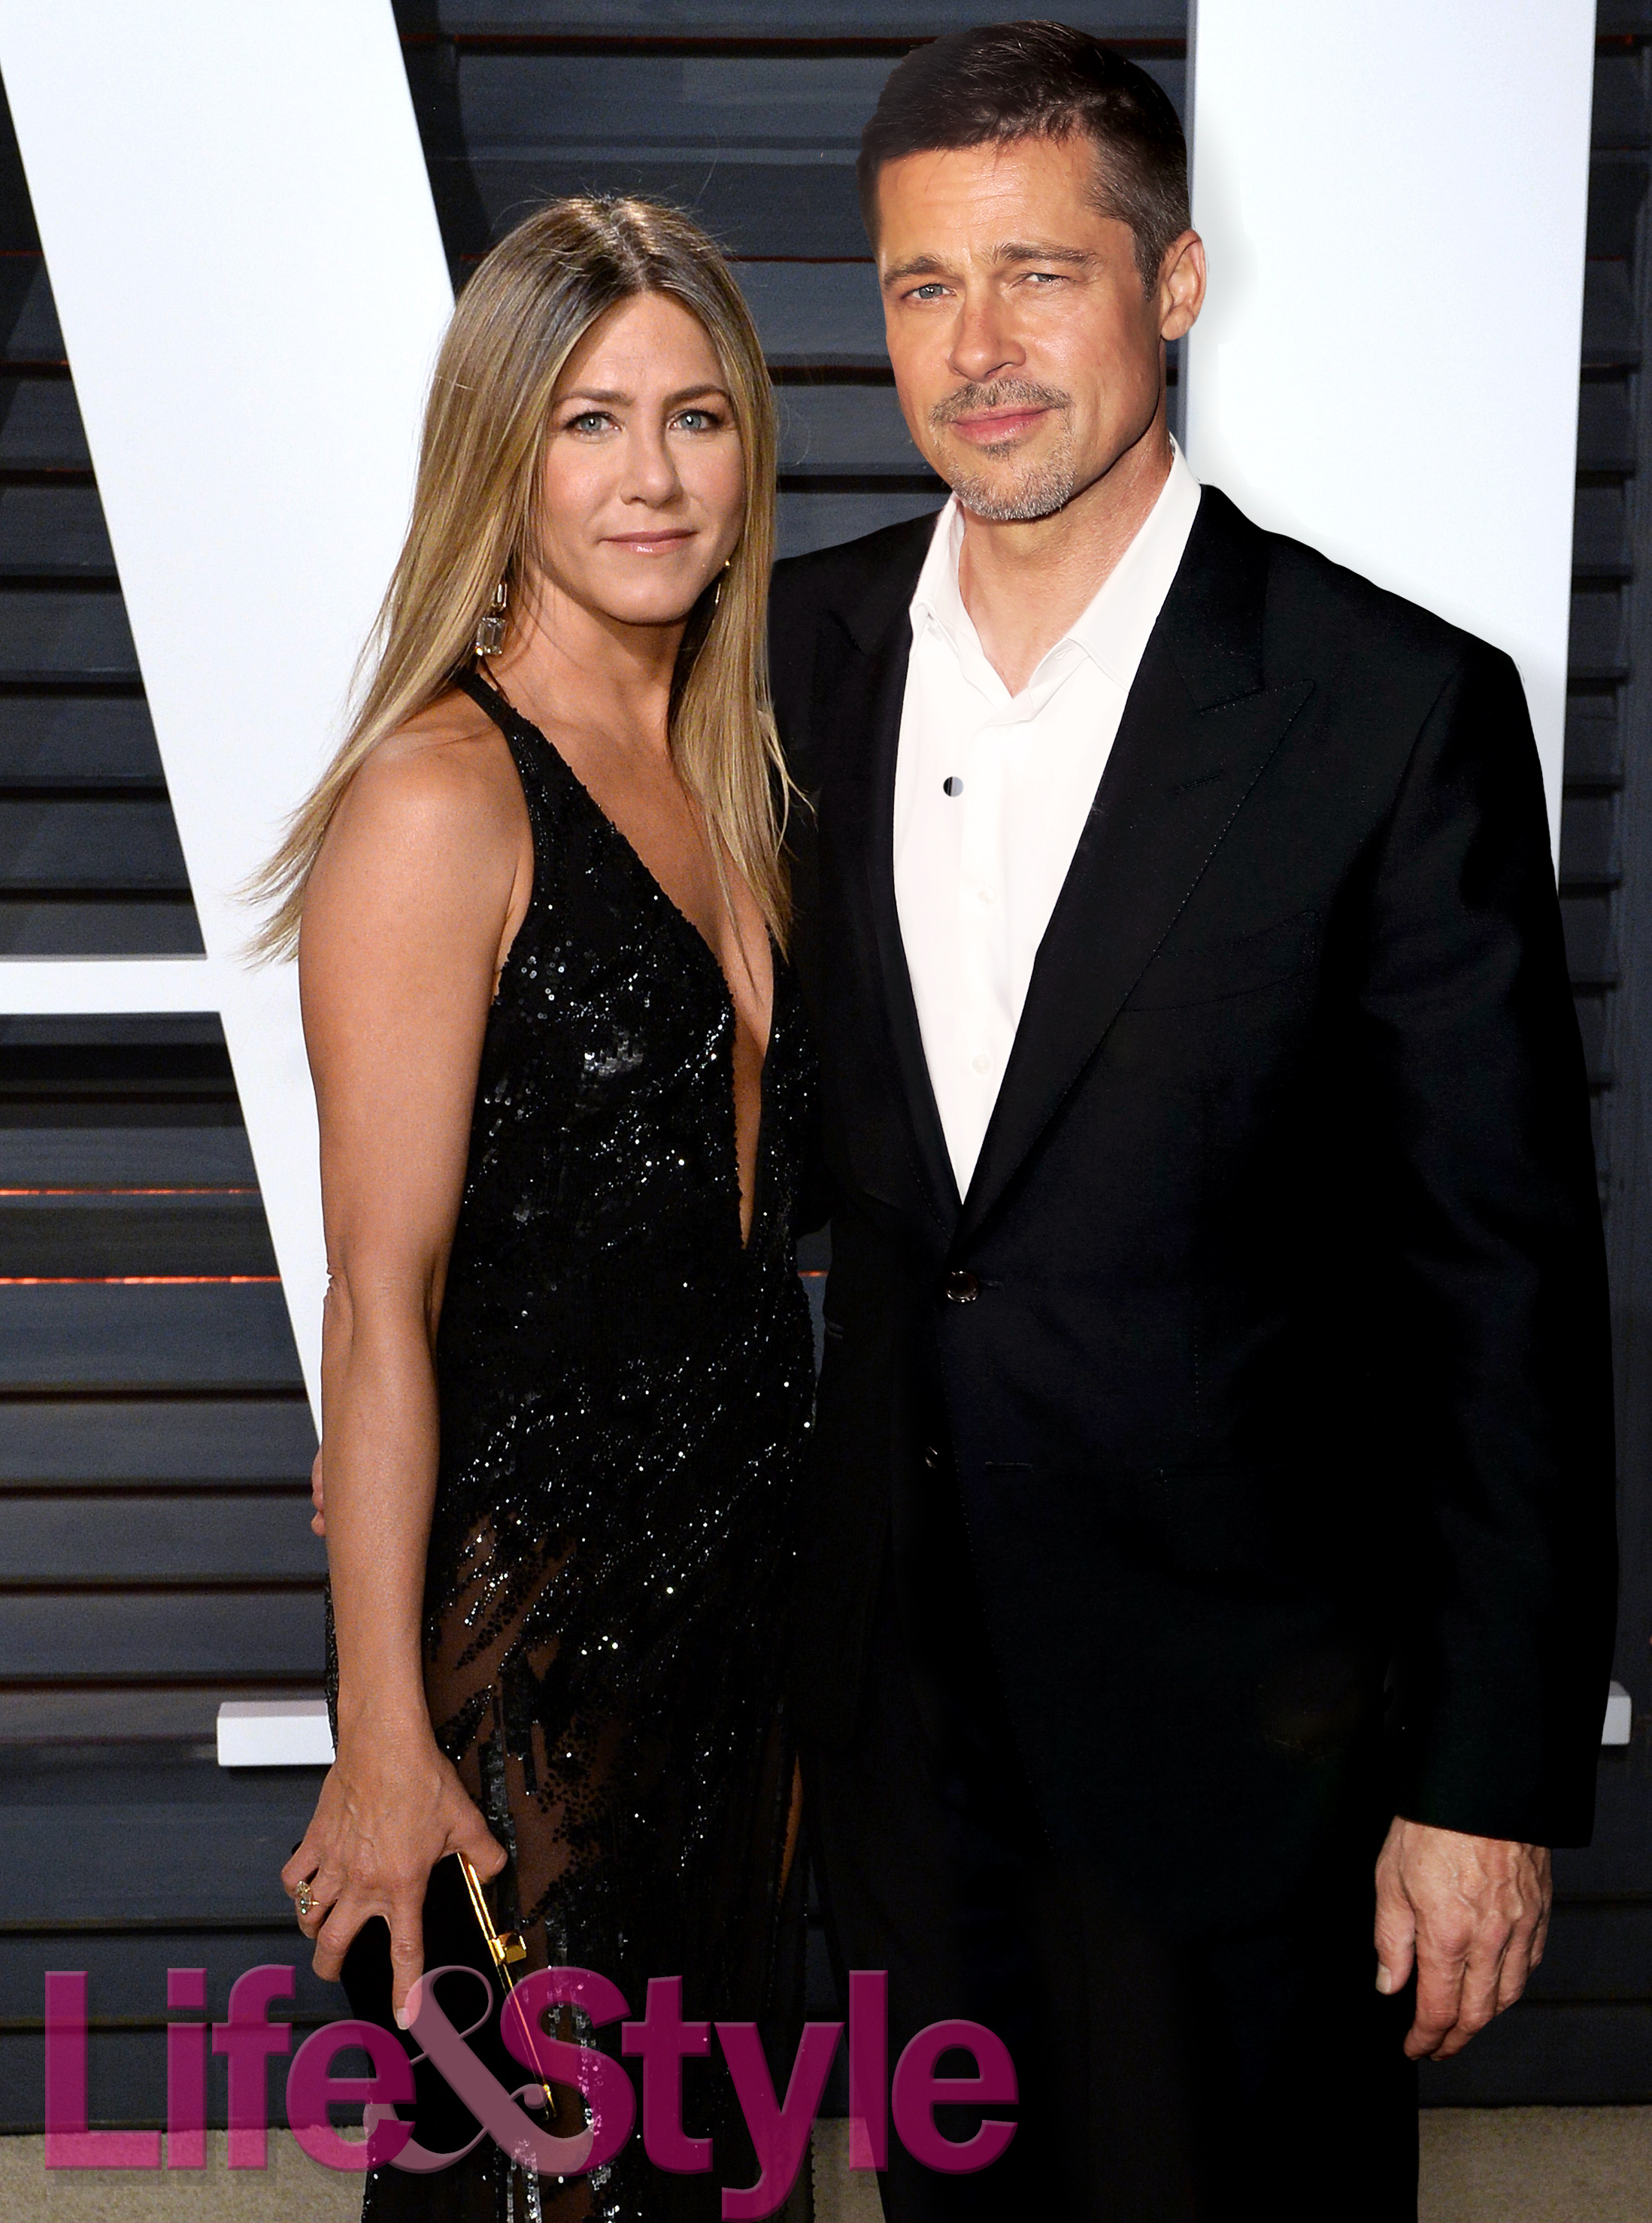 We Imagined What Brad Pitt and Jennifer Aniston Would Look Like